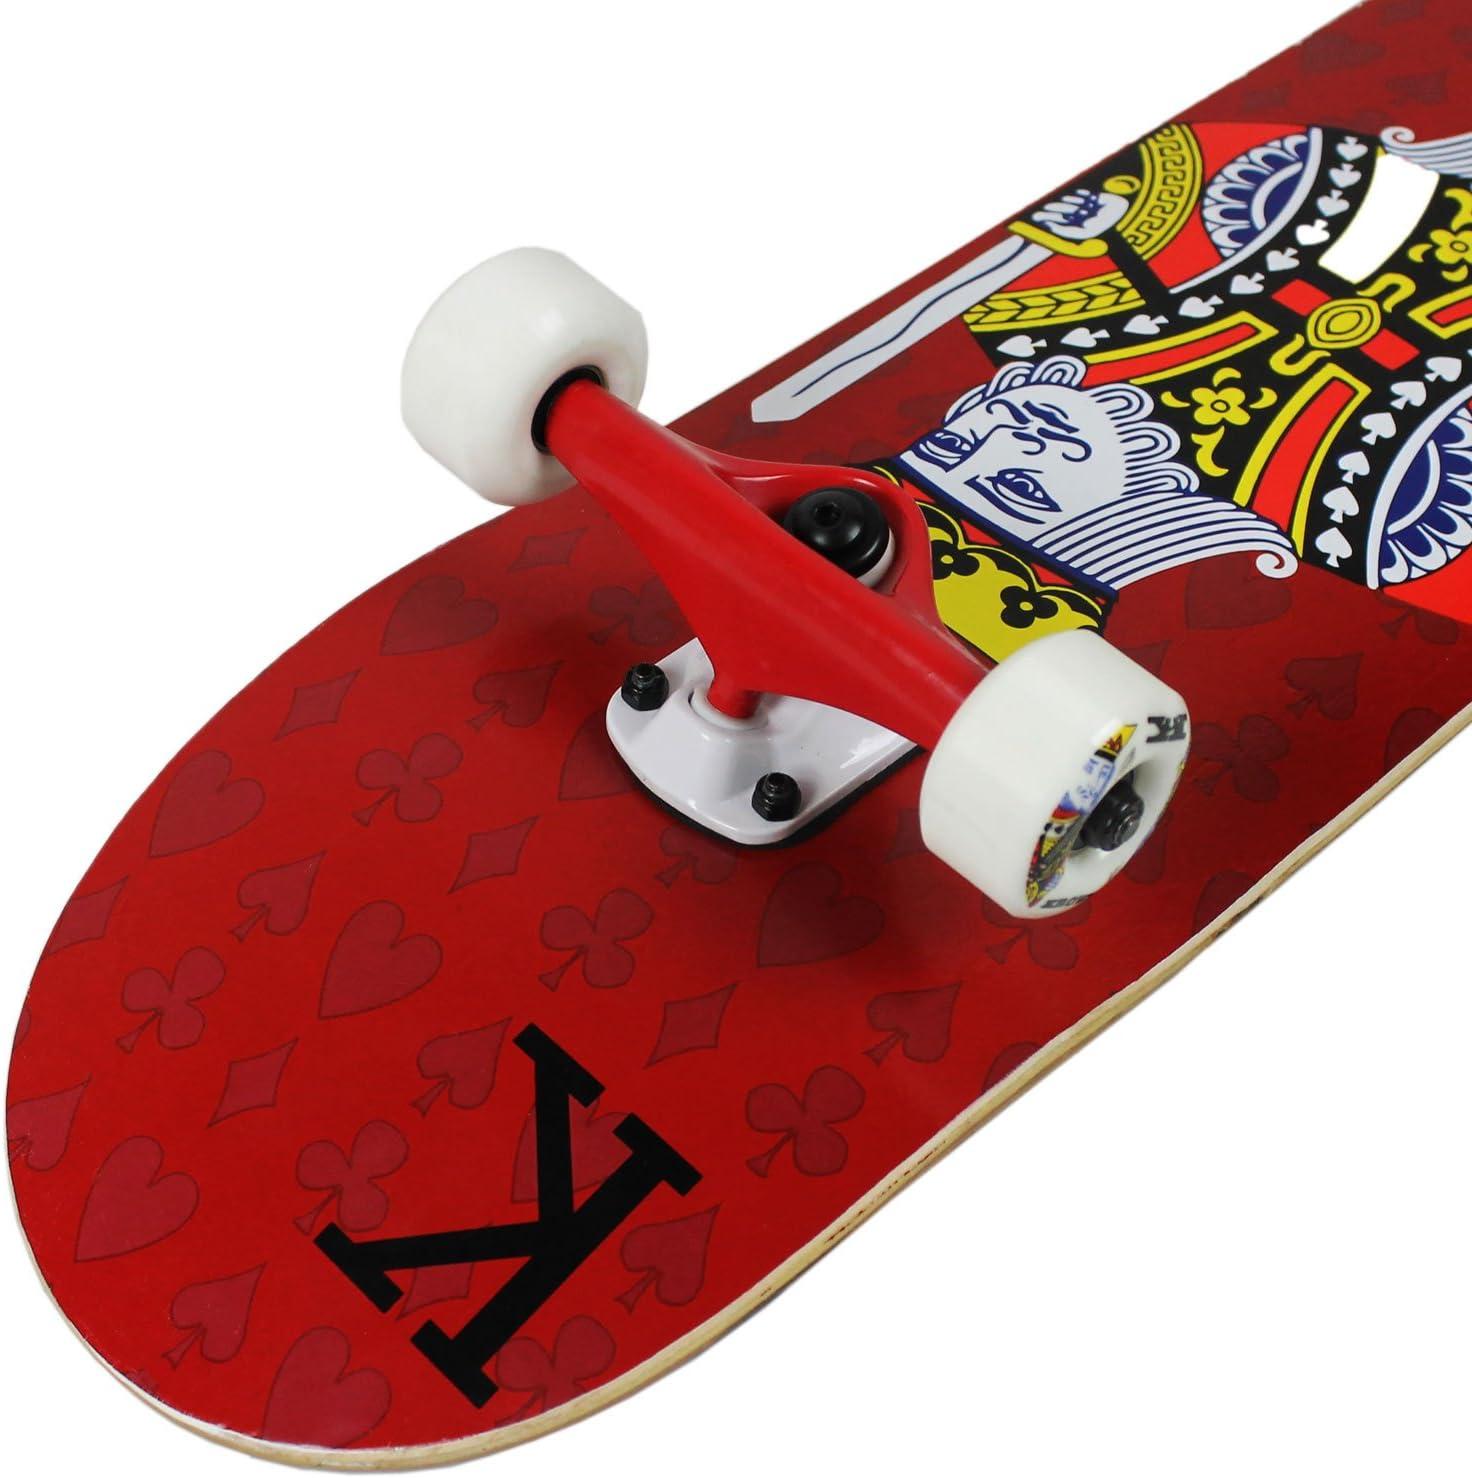 KPC Complete Skateboard - Pro Style Quality - Maple 7-Ply Deck, Aluminum  Trucks, Urethane Wheels, Precision Bearings - The Perfect Beginners First  Board King Red